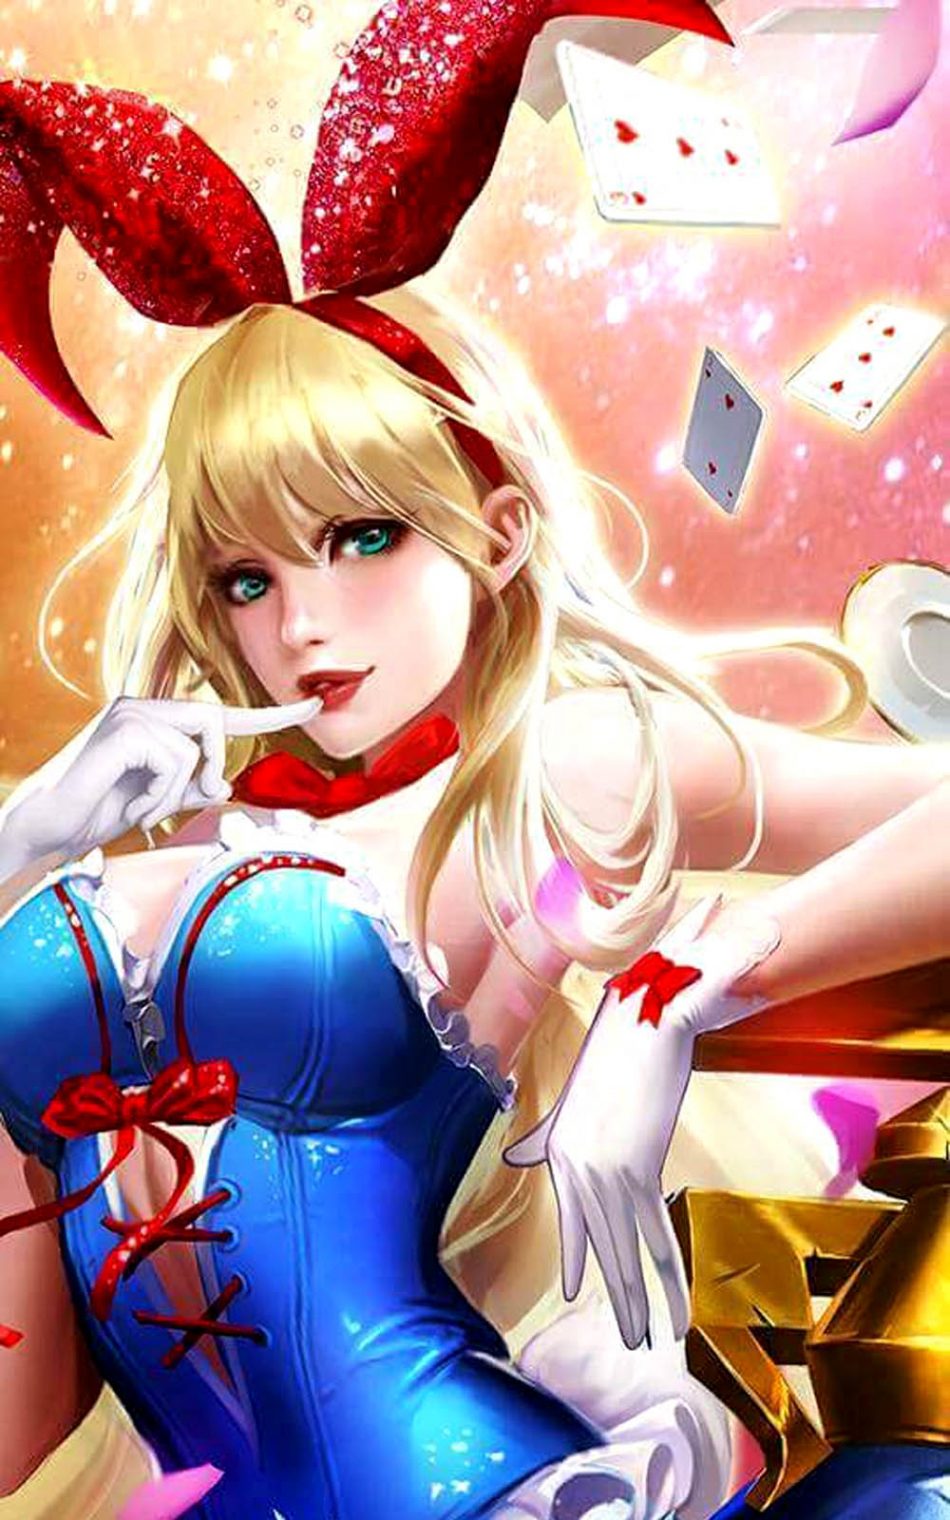 Download The Bunny Girl Layla Mobile Legends Pure 4K Ultra HD 950x1520